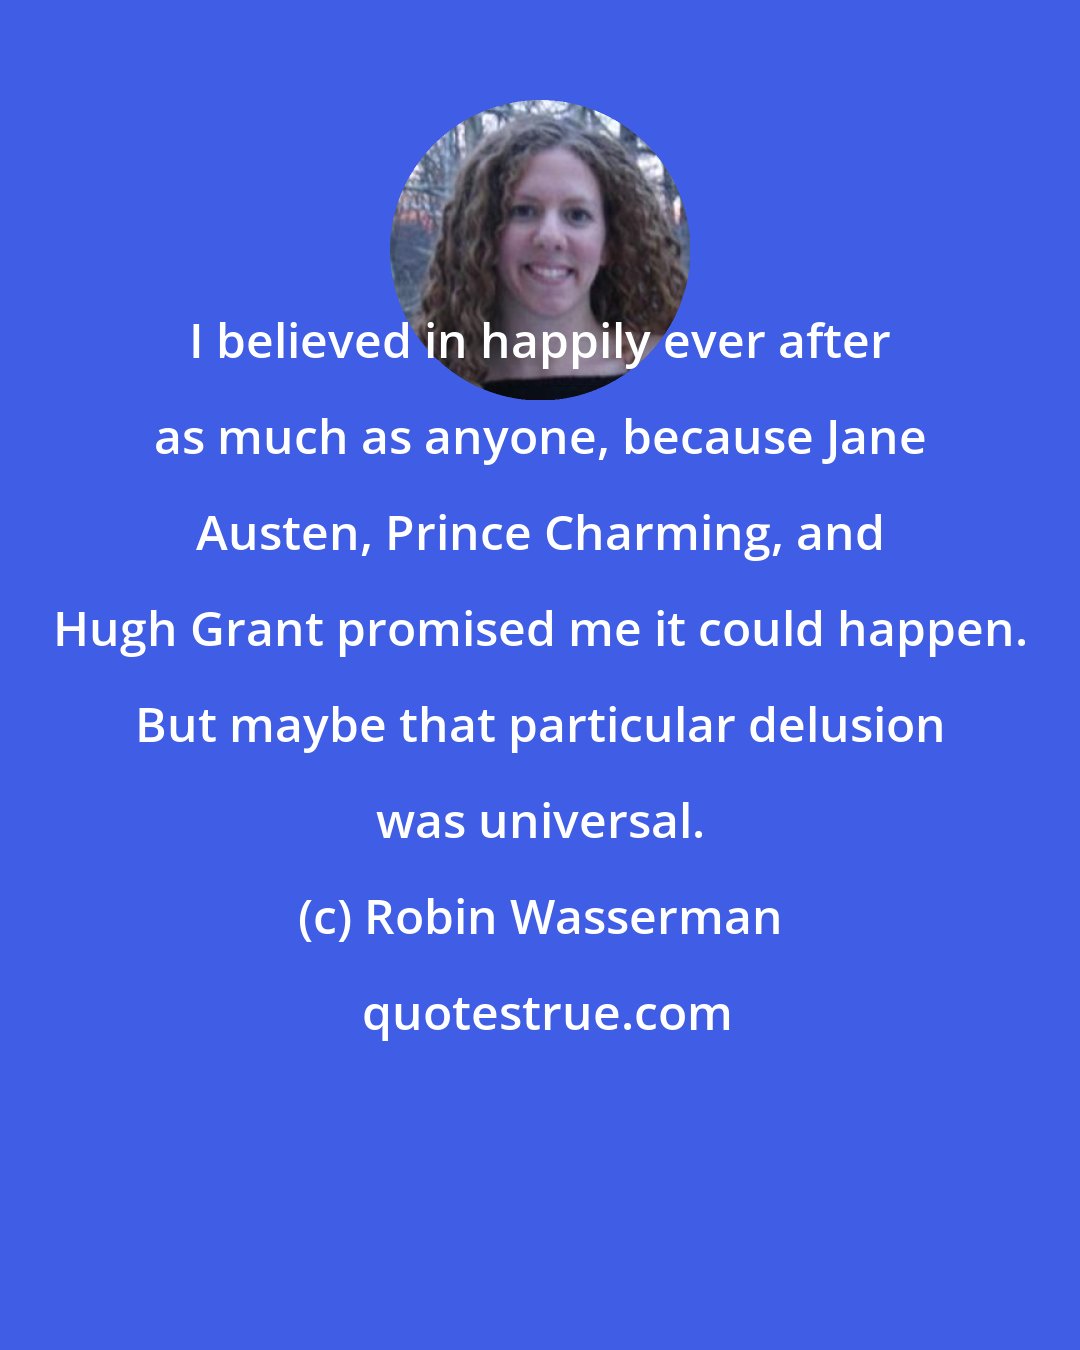 Robin Wasserman: I believed in happily ever after as much as anyone, because Jane Austen, Prince Charming, and Hugh Grant promised me it could happen. But maybe that particular delusion was universal.